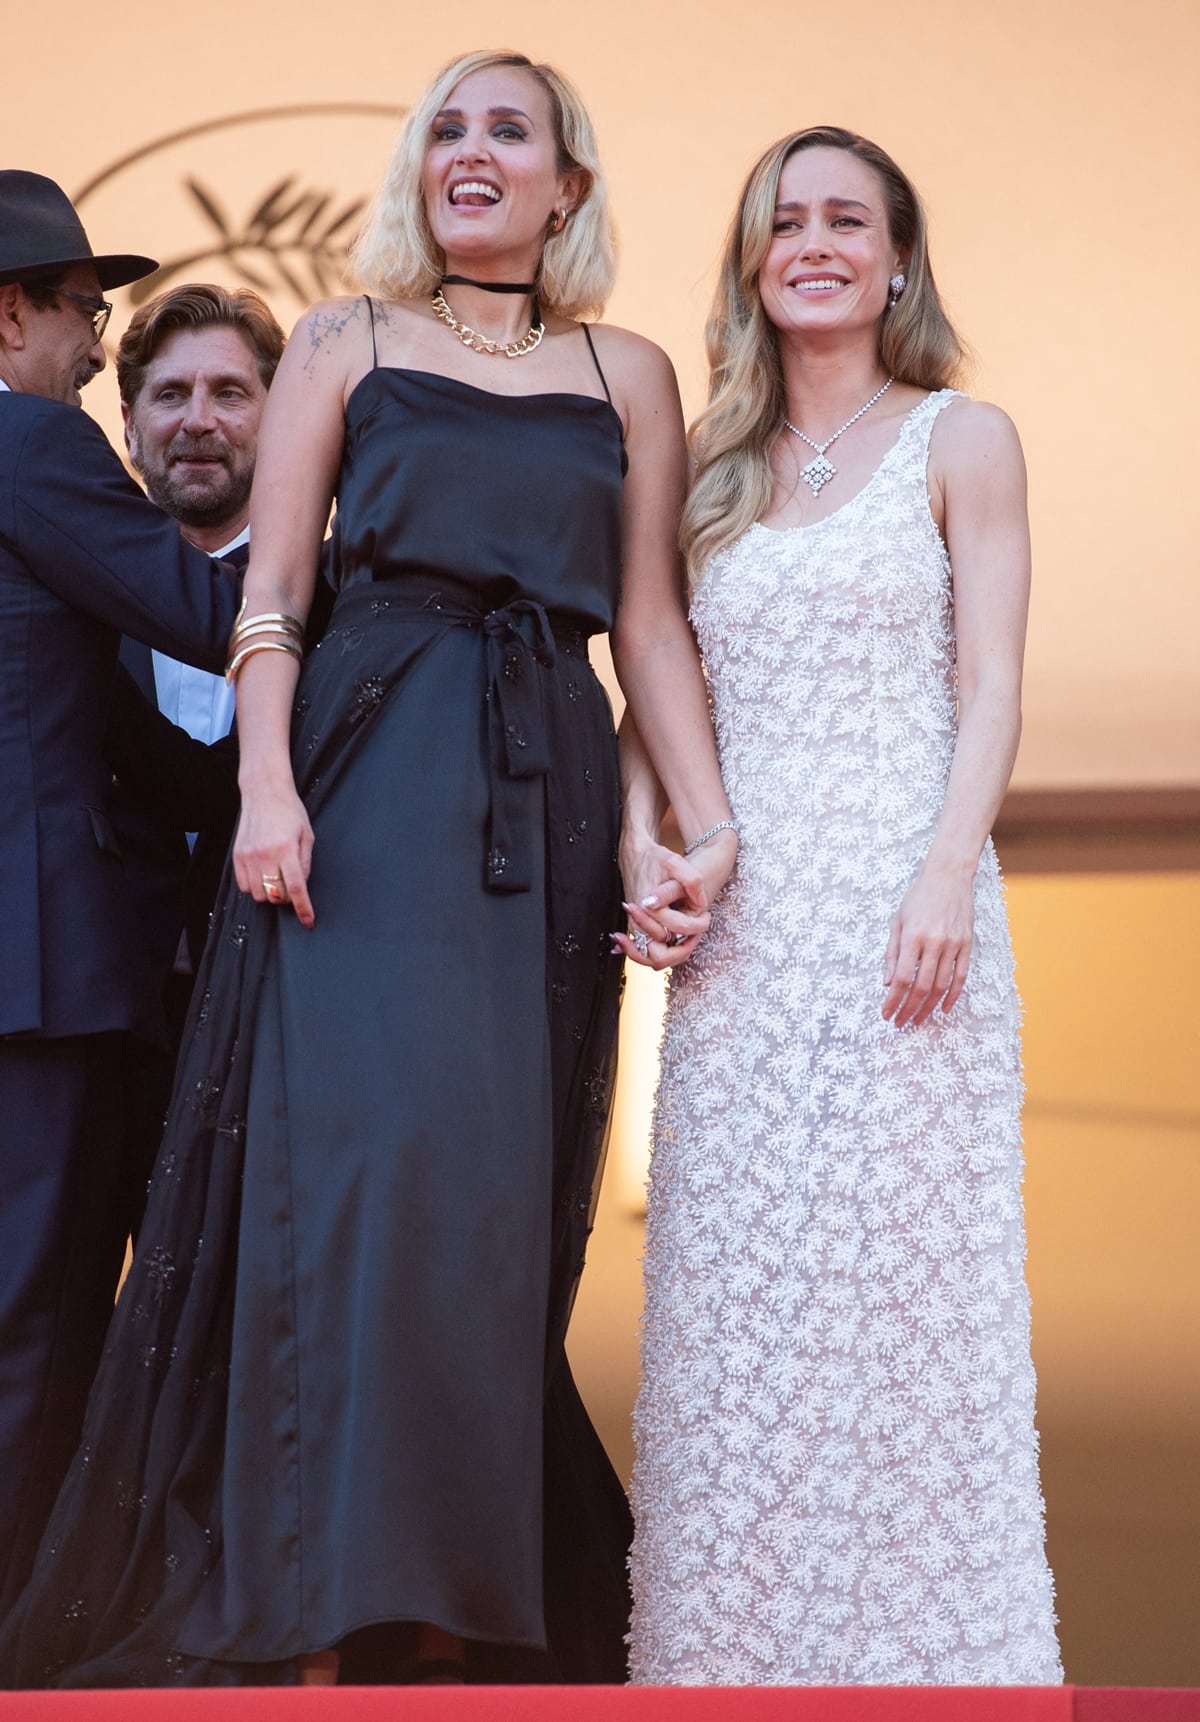 Julia Ducournau and Brie Larson attend the "Elemental" screening and closing ceremony red carpet during the 76th annual Cannes film festival